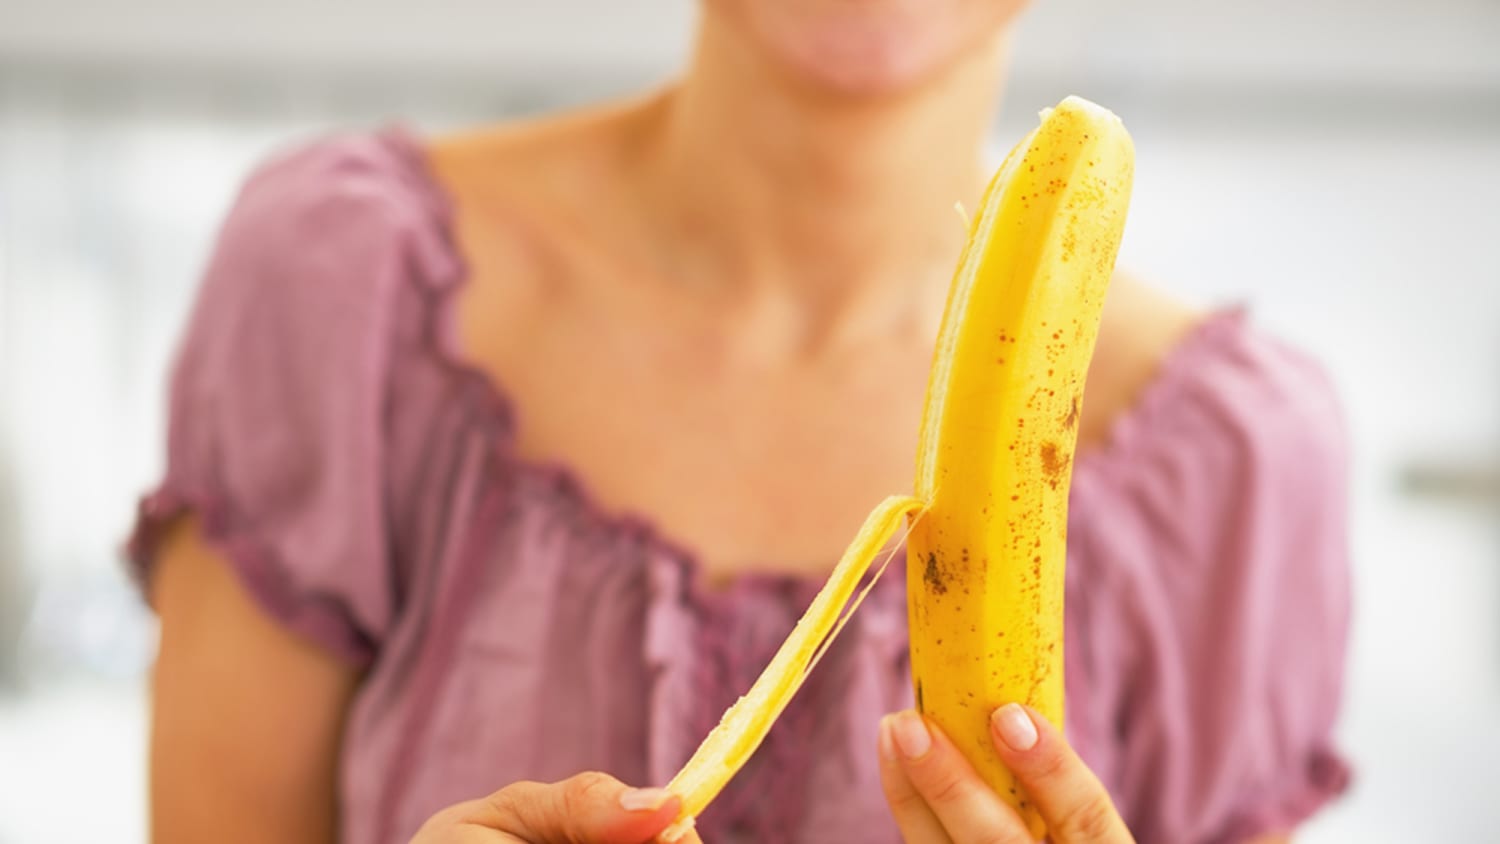 Should you be eating banana peels? The science is slippery ...